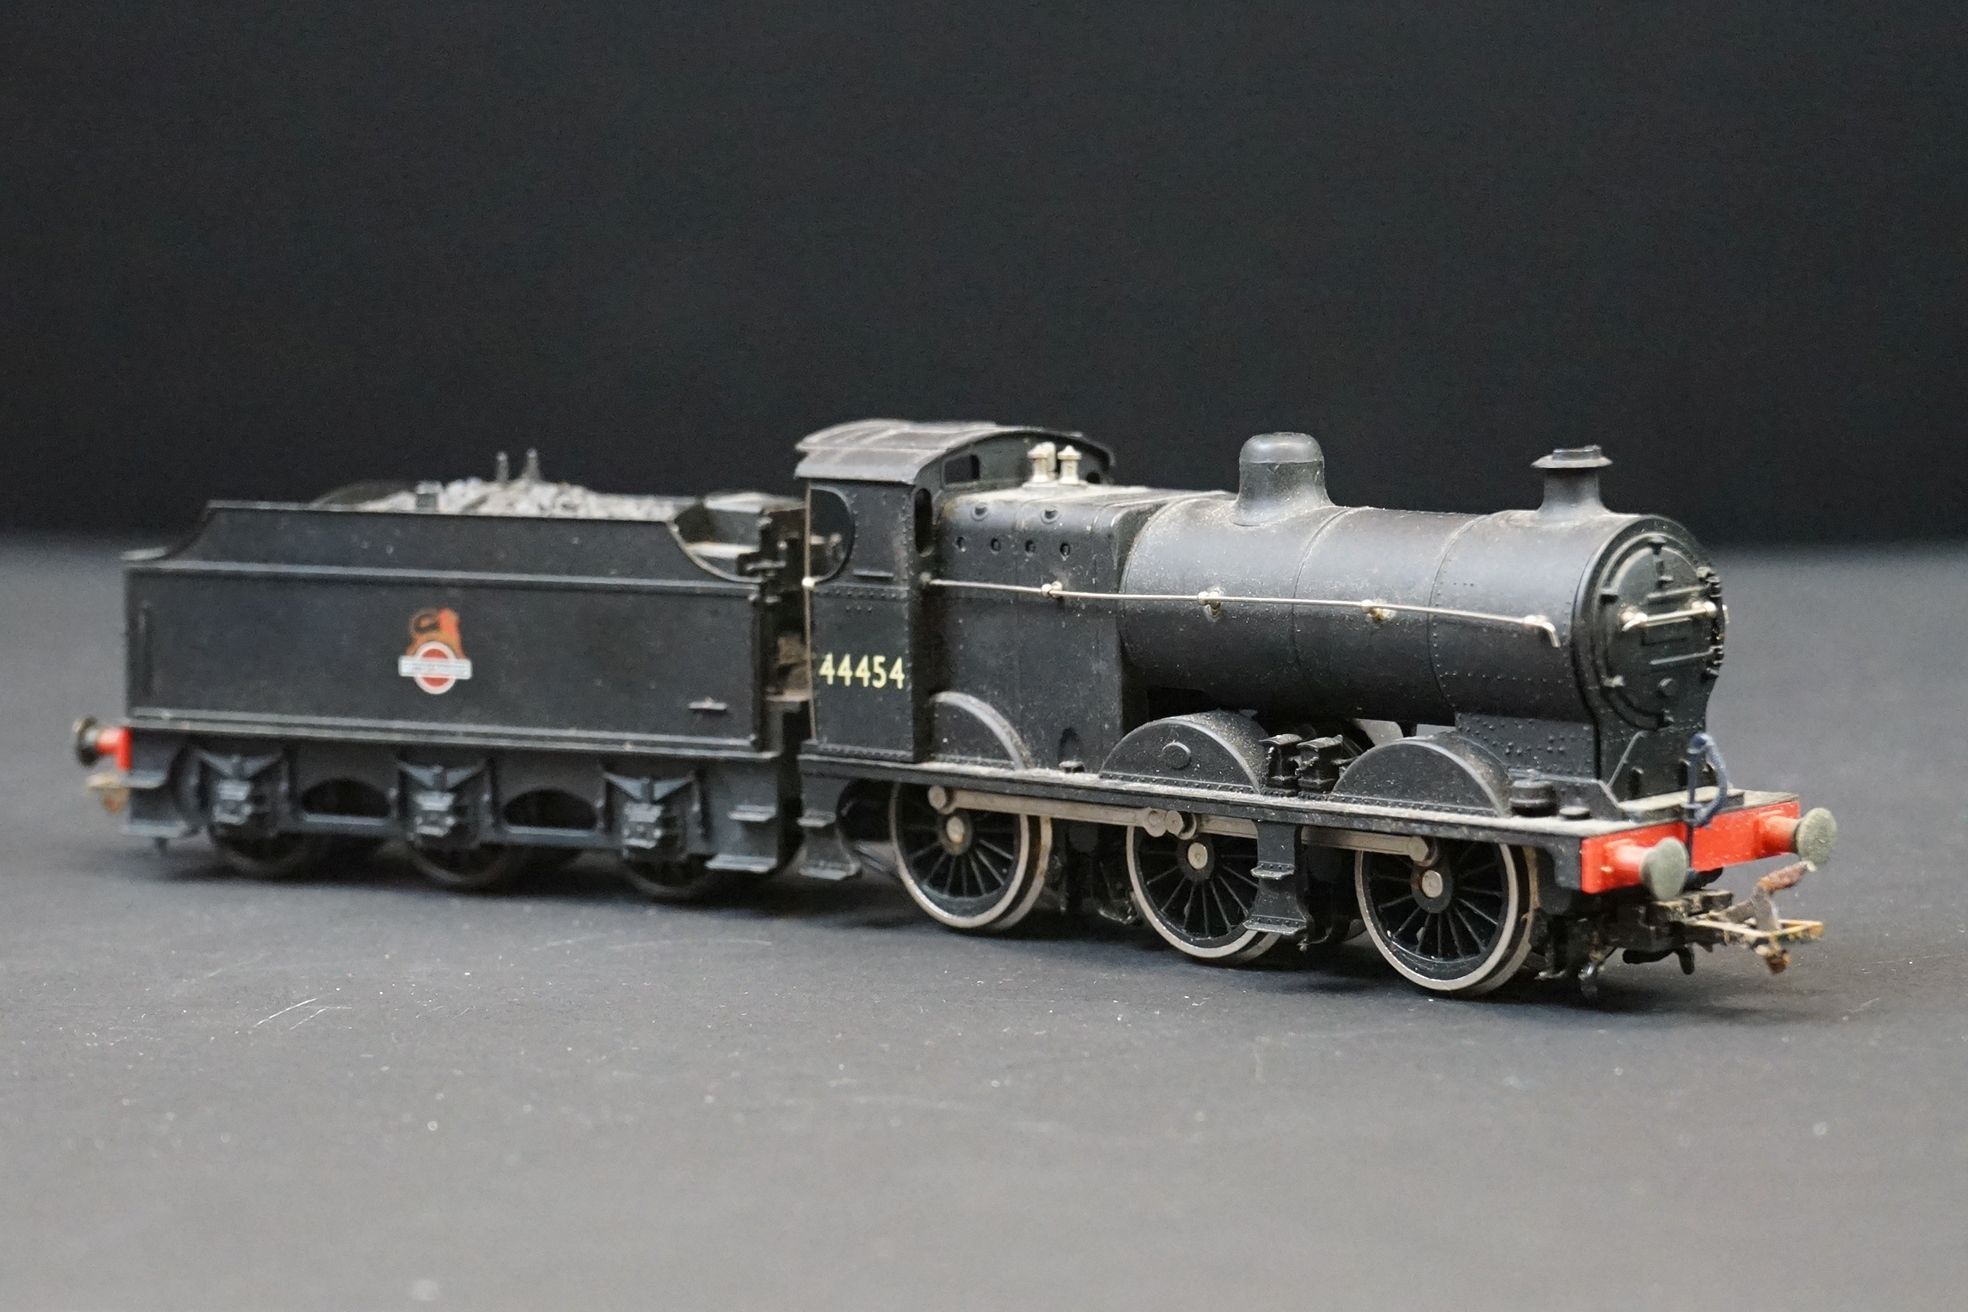 13 OO gauge locomotives to include Hornby, Lima & Airfix featuring Hornby Dublo 2-8-0LMS in black, - Image 11 of 12